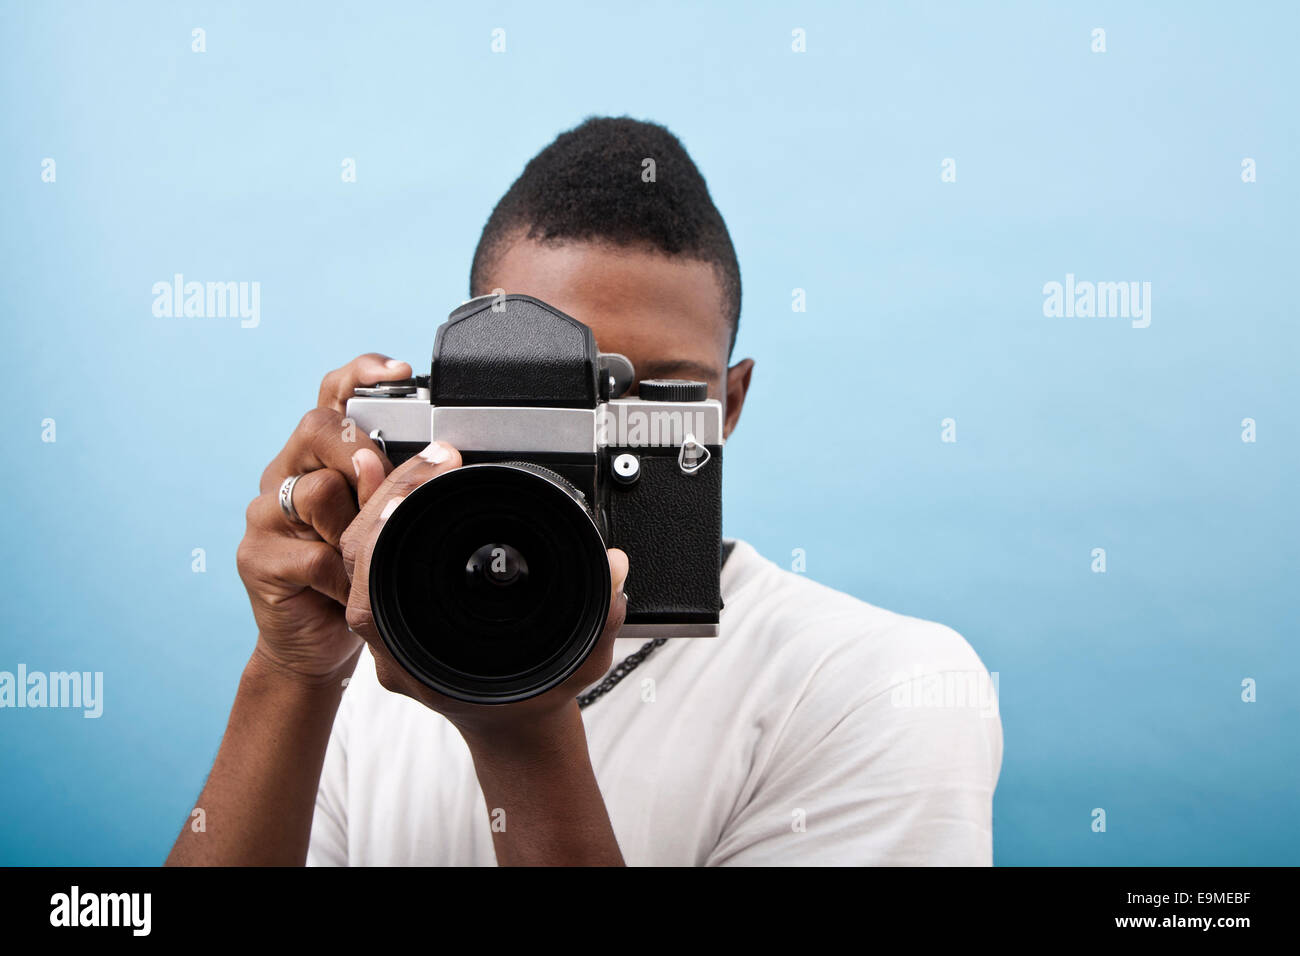 A young black man using an old-fashioned camera Stock Photo